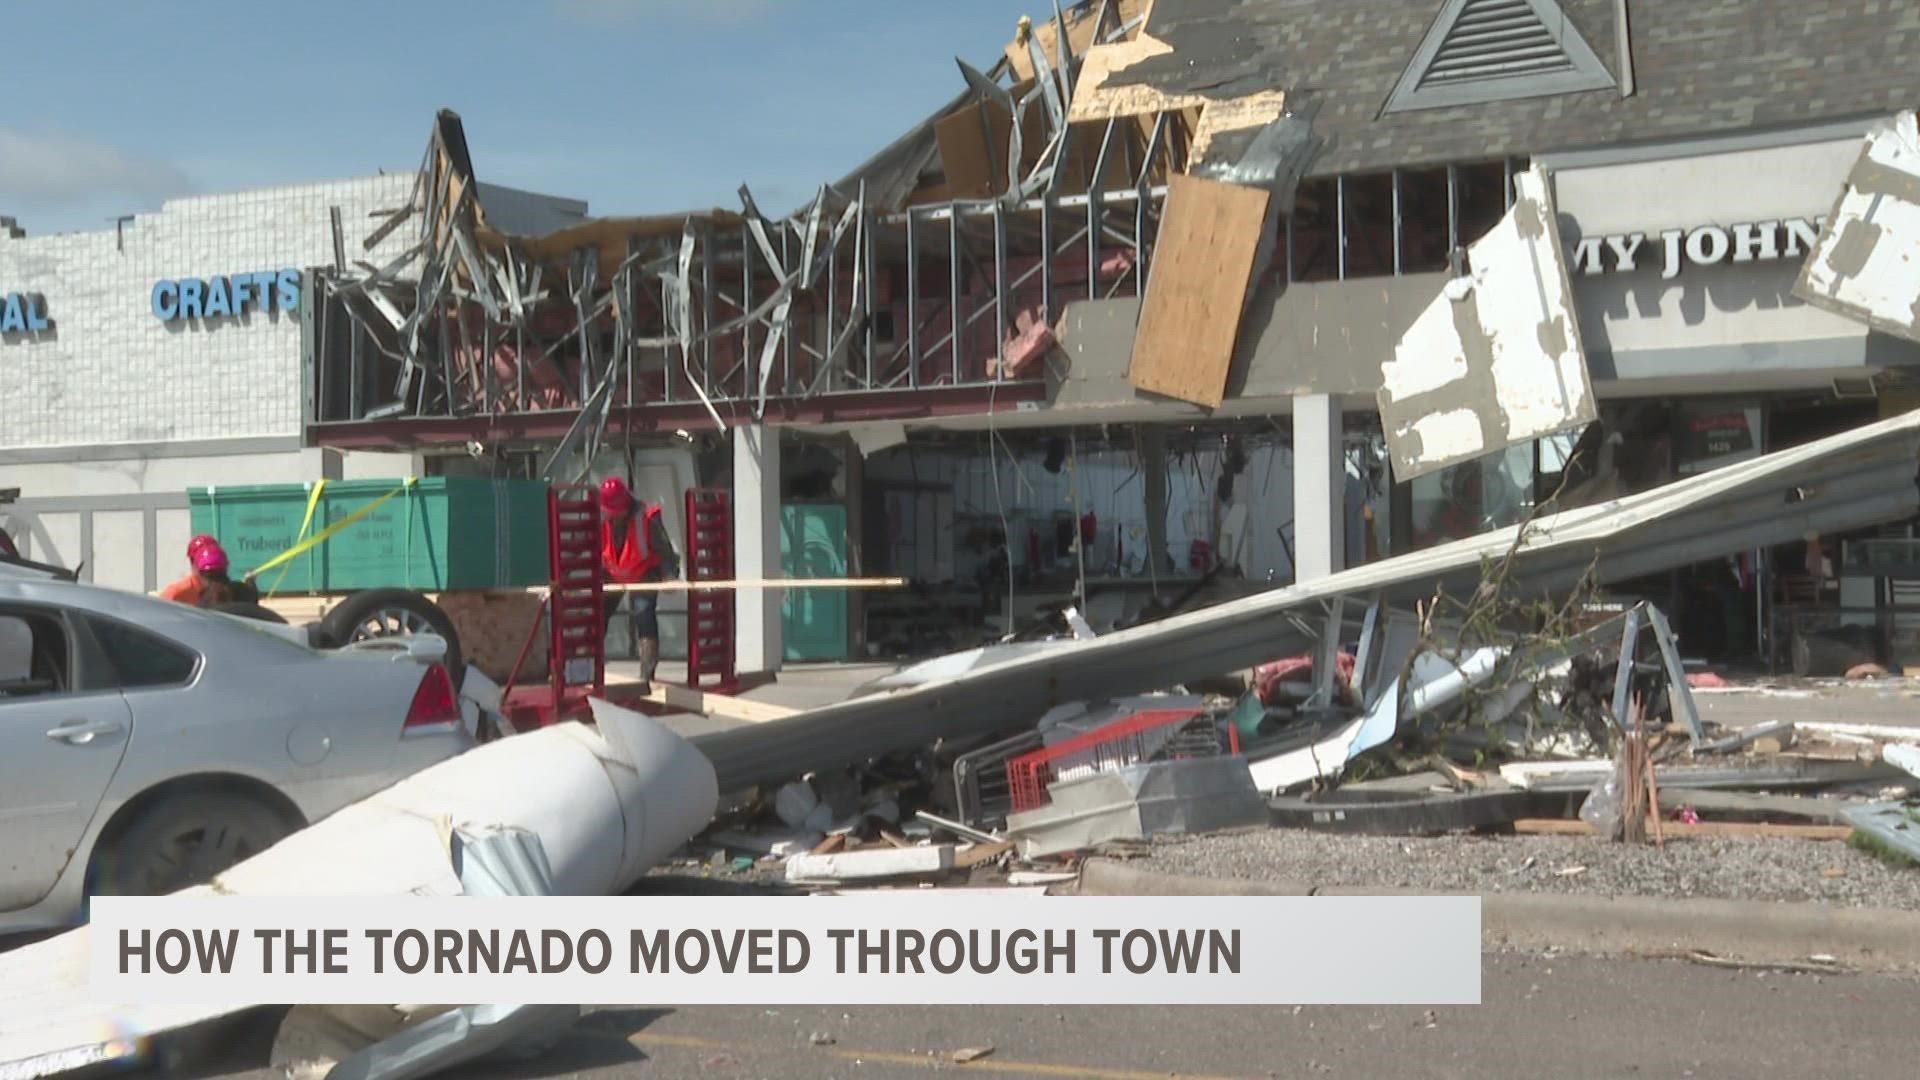 Early estimates from the National Weather Service show the tornado formed west of Gaylord, moving at about 55 miles per hour for about 25 minutes.